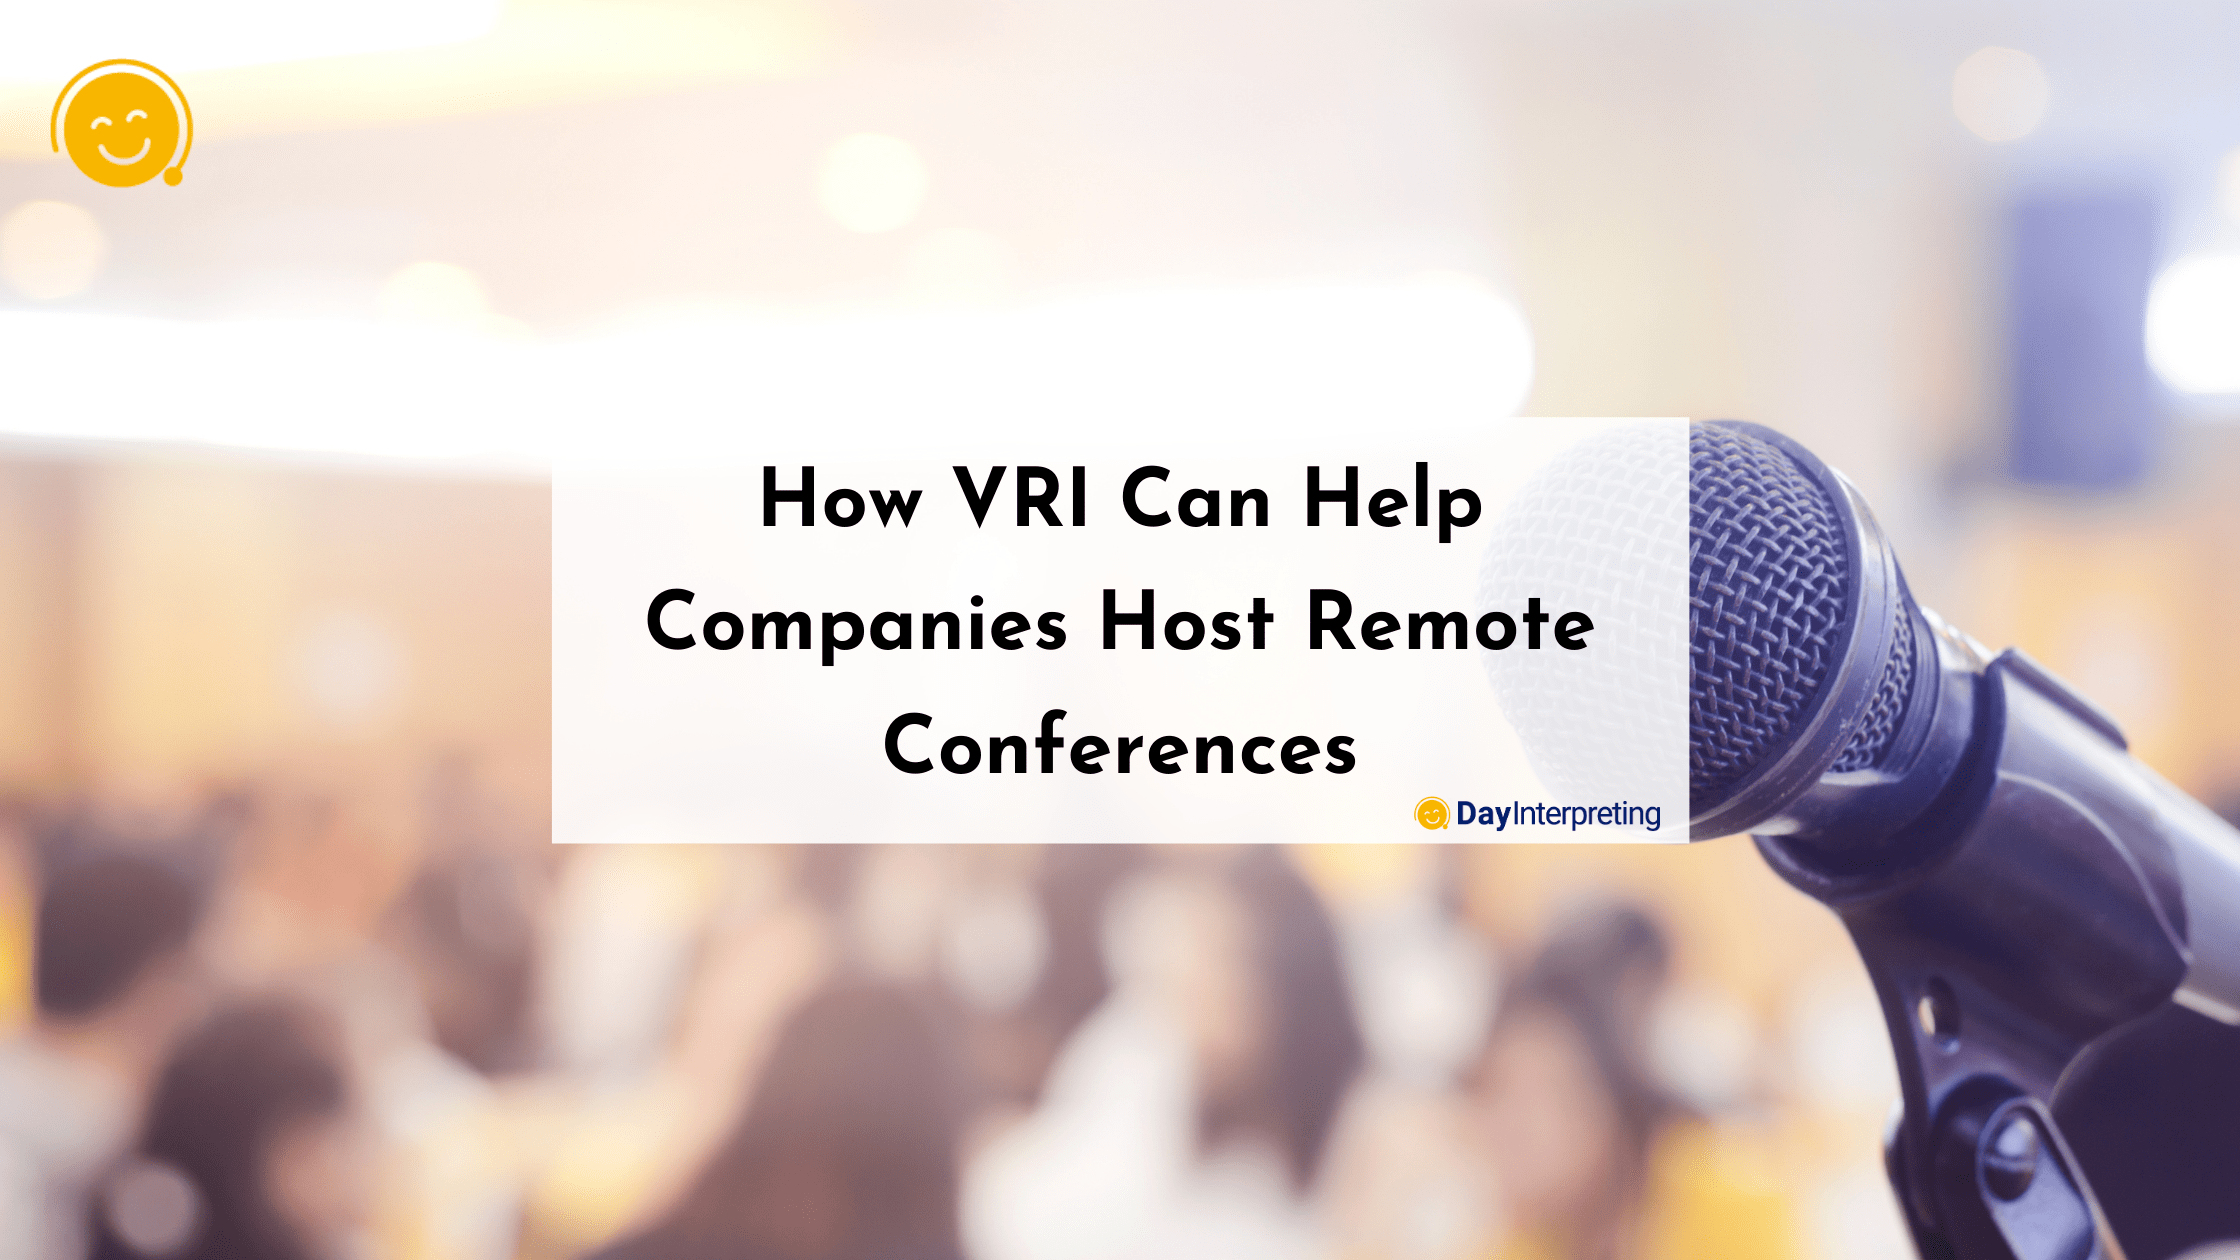 How VRI Can Help Companies Host Remote Conferences